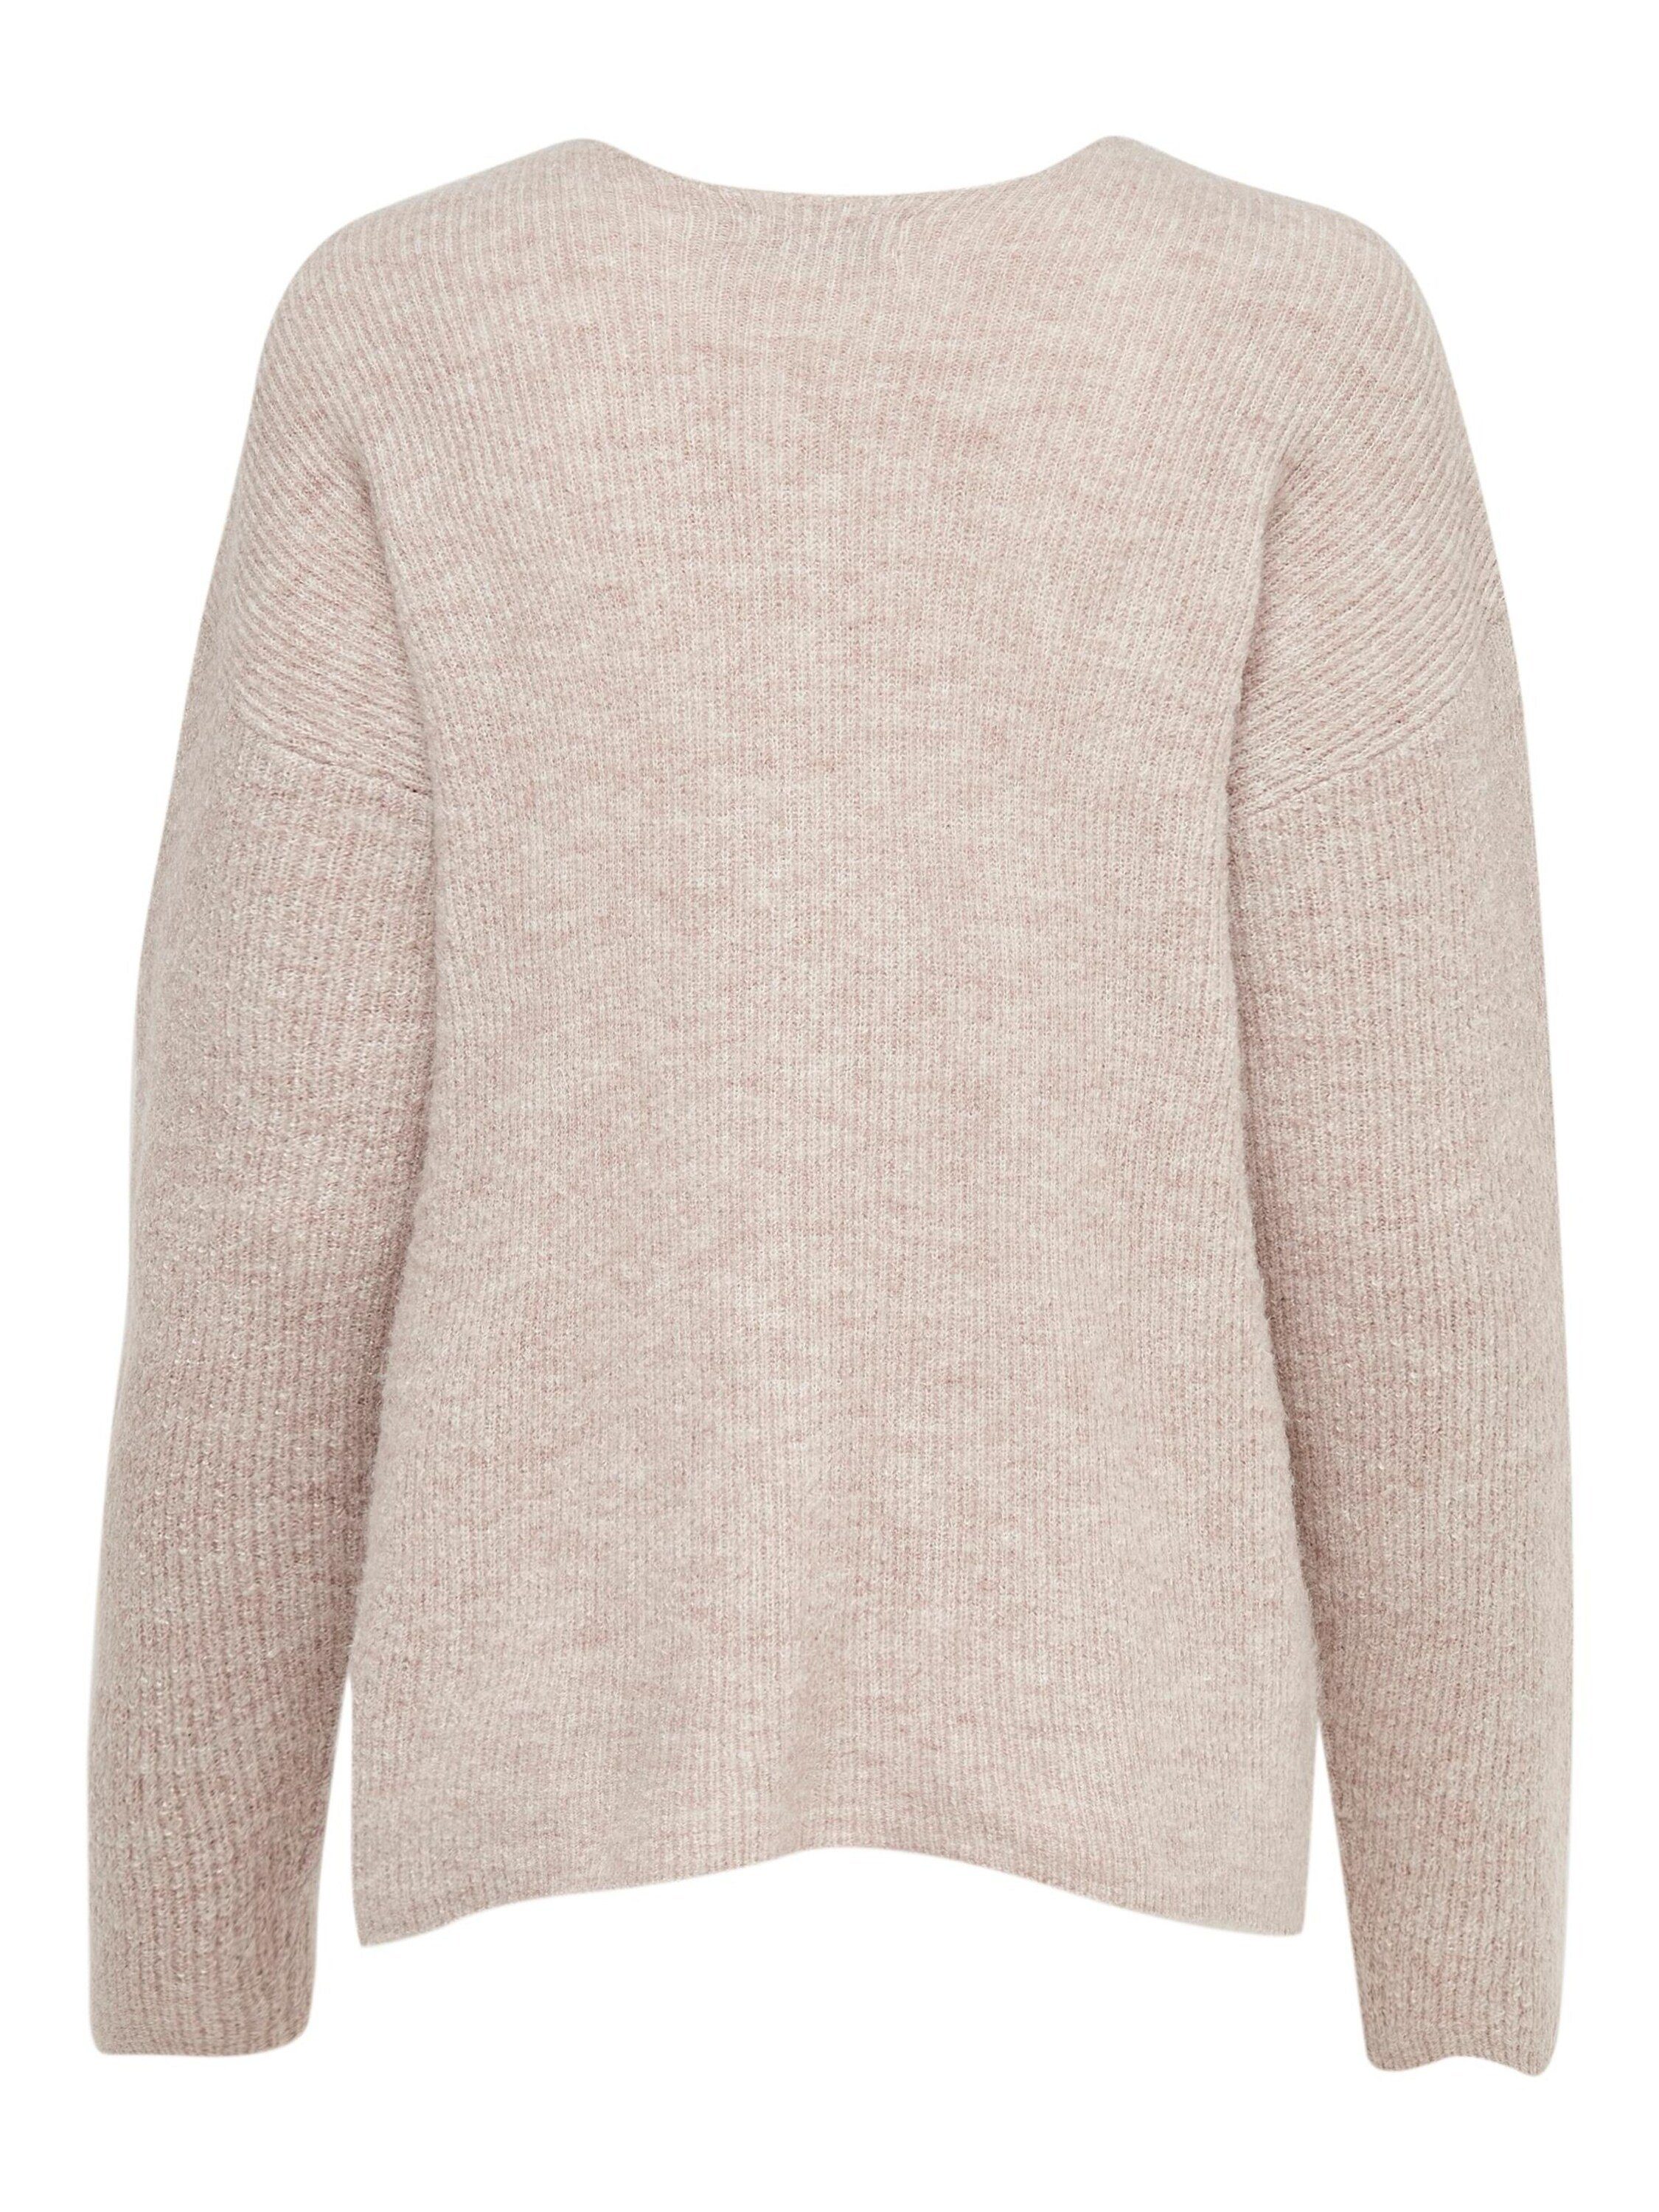 Details ONLY stone Camilla Plain/ohne pumice Strickpullover (1-tlg)